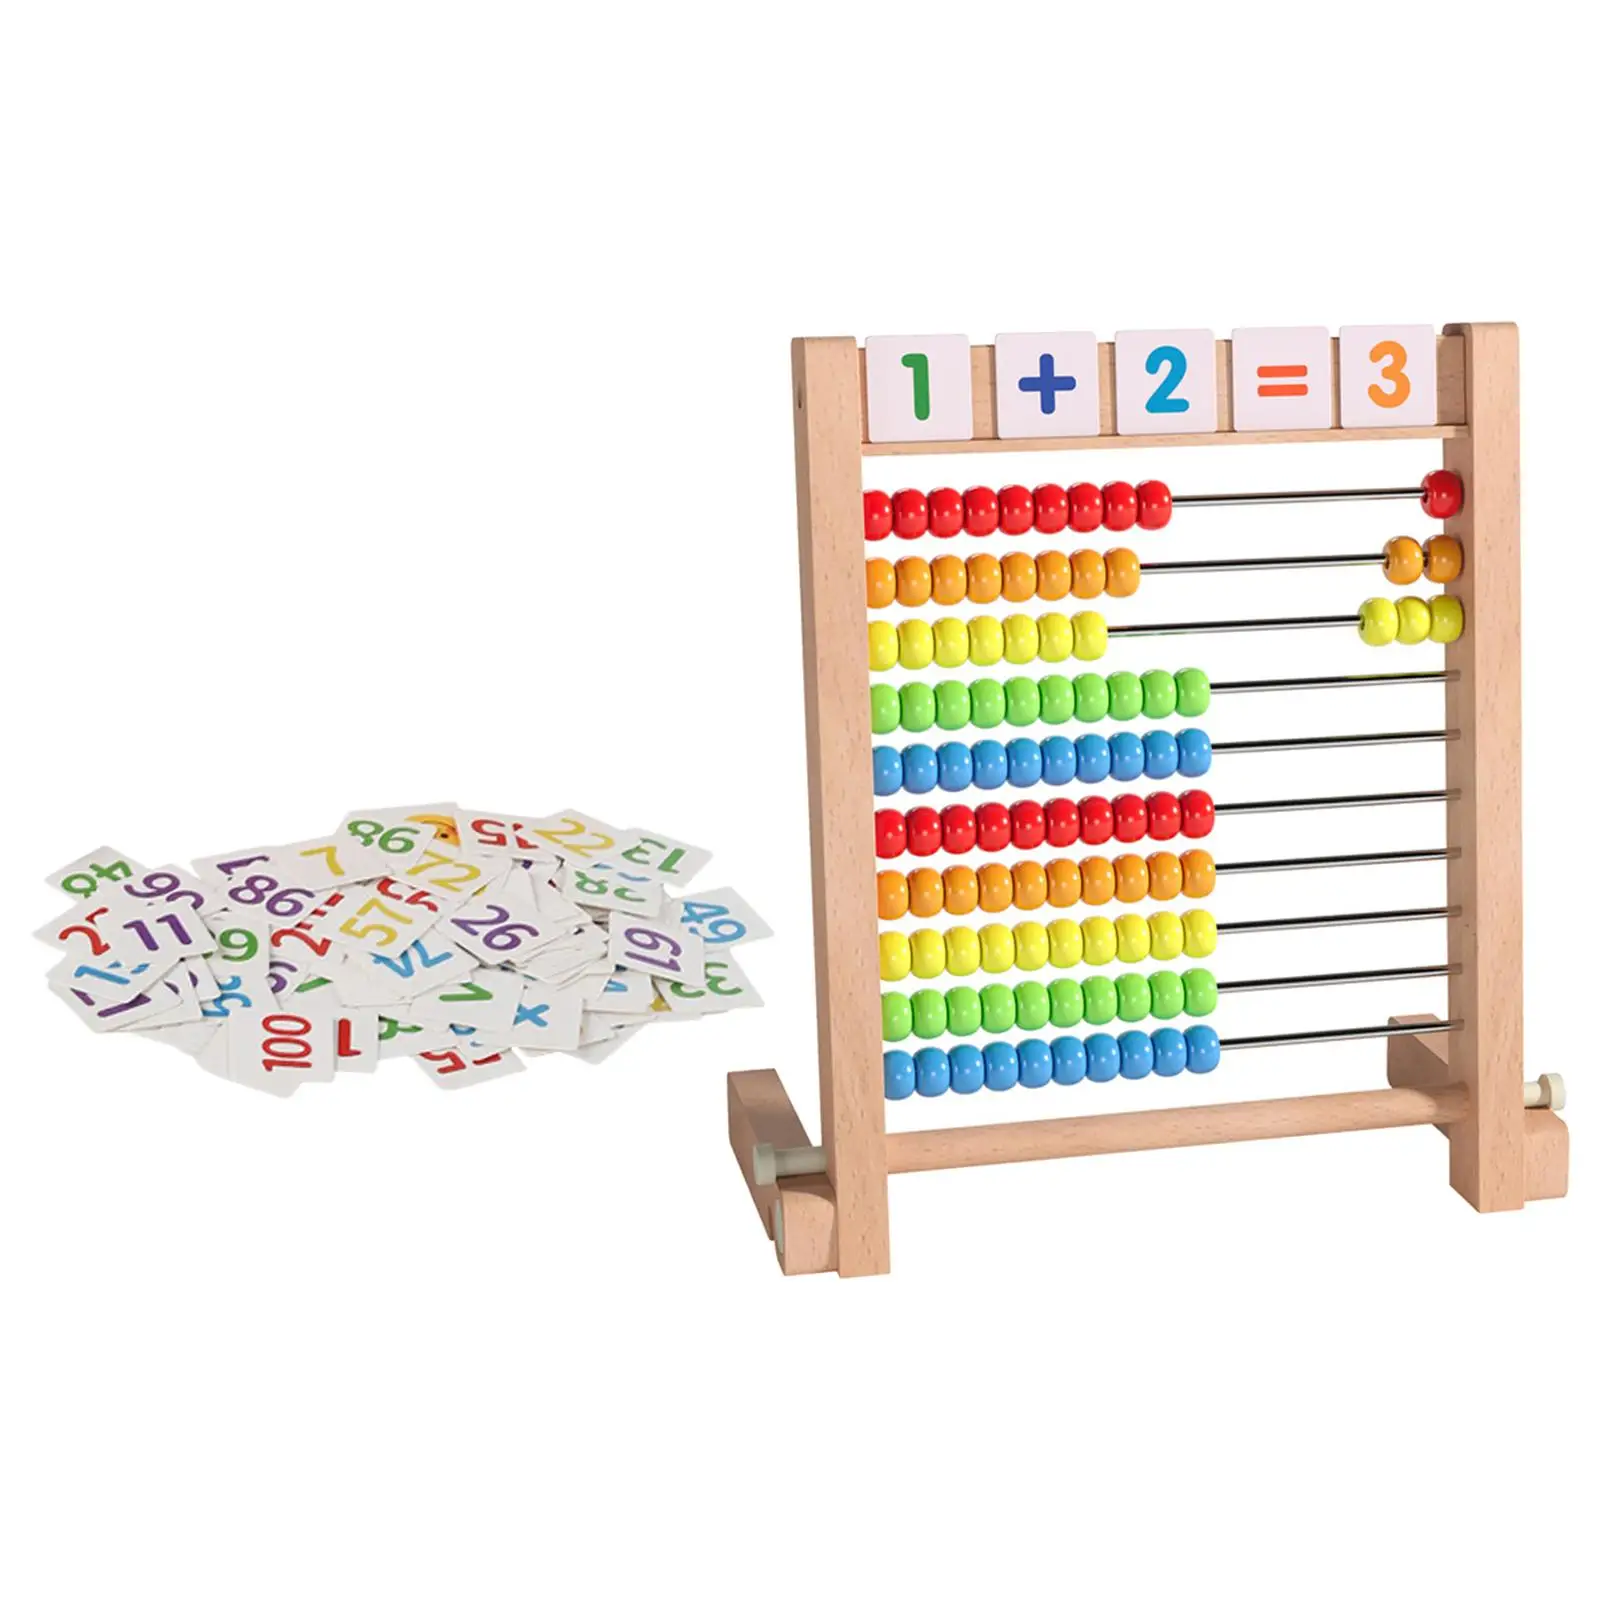 

Wooden Abacus Ten Frame Set Bead Arithmetic Abacus Math Counters for Kids Educational Counting Frames Toy for Kindergarten Kids